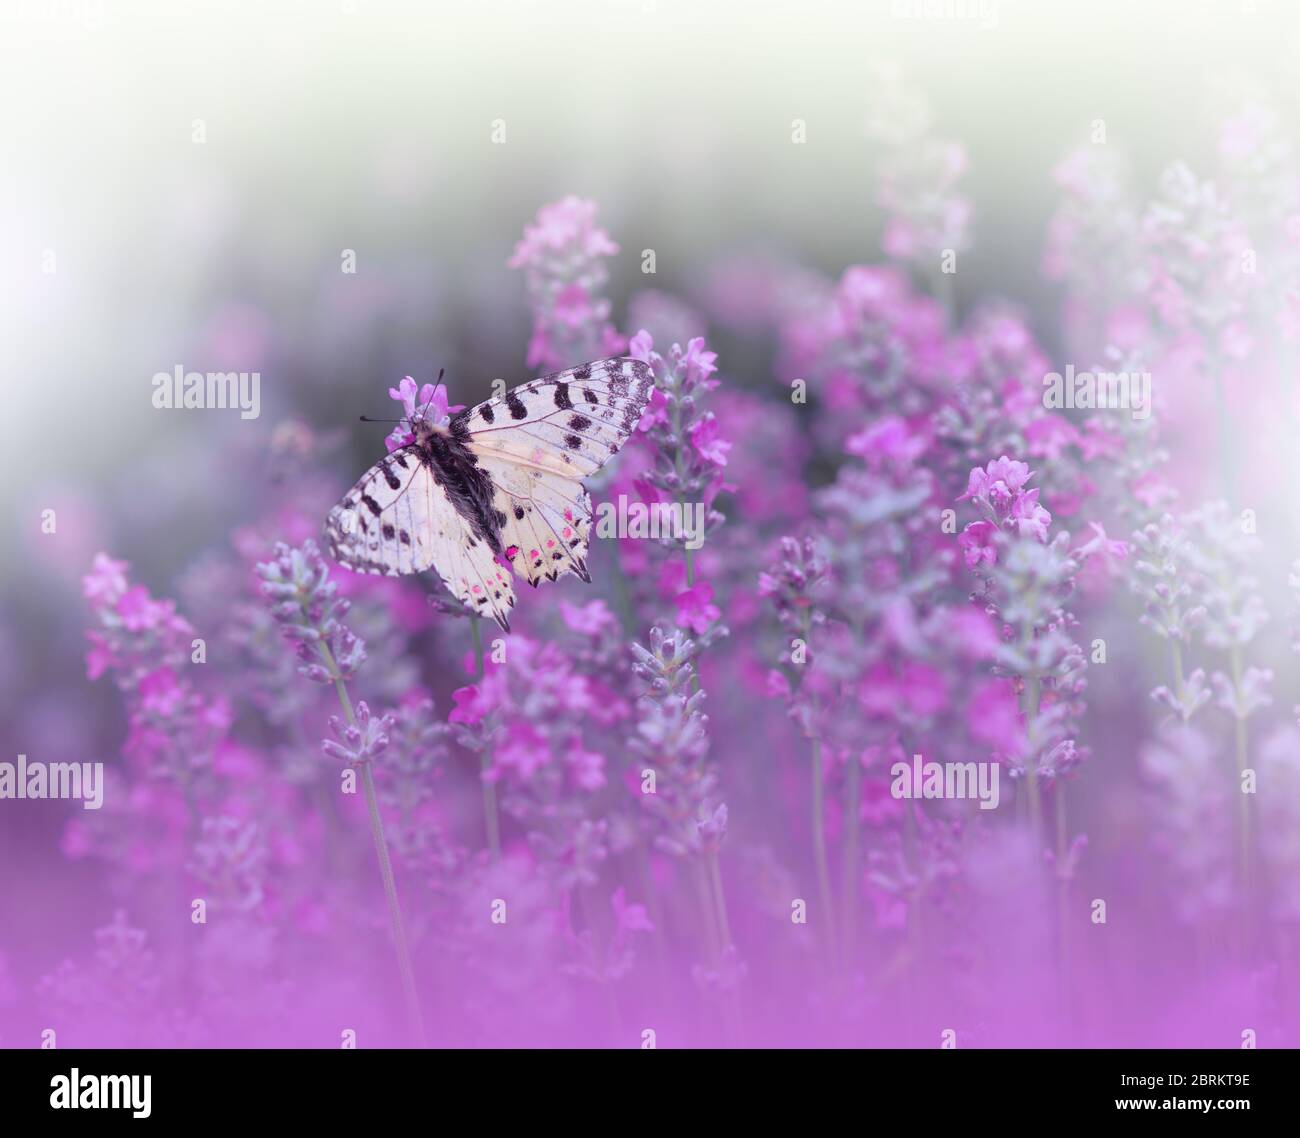 Beautiful Violet Nature Background.Floral Art Design.Macro Photography.Abstract Pastel Landscape.Copy Space.Summer Butterfly and Lavender Field.Aroma. Stock Photo